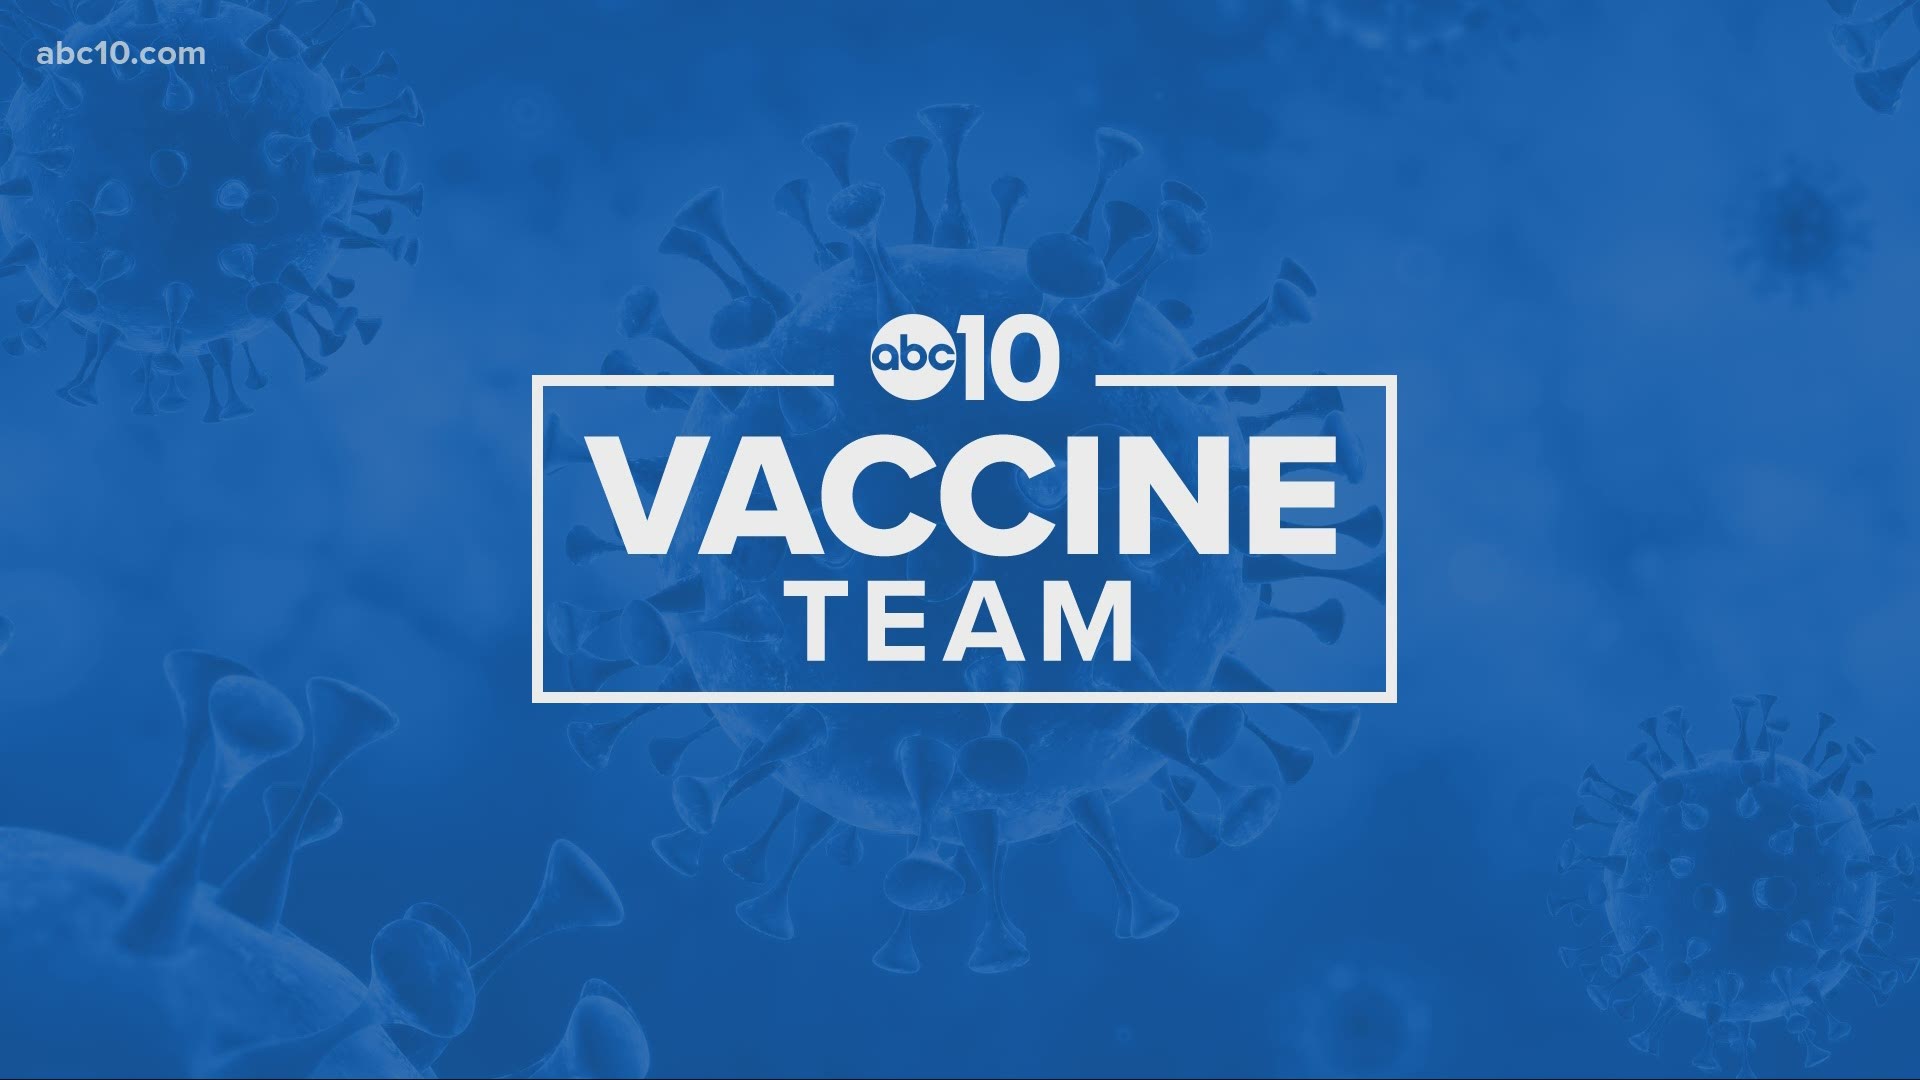 Volunteering at a clinic could get you a COVID-19 vaccine, but so far there are no nearby clinics taking any volunteers according to the site.